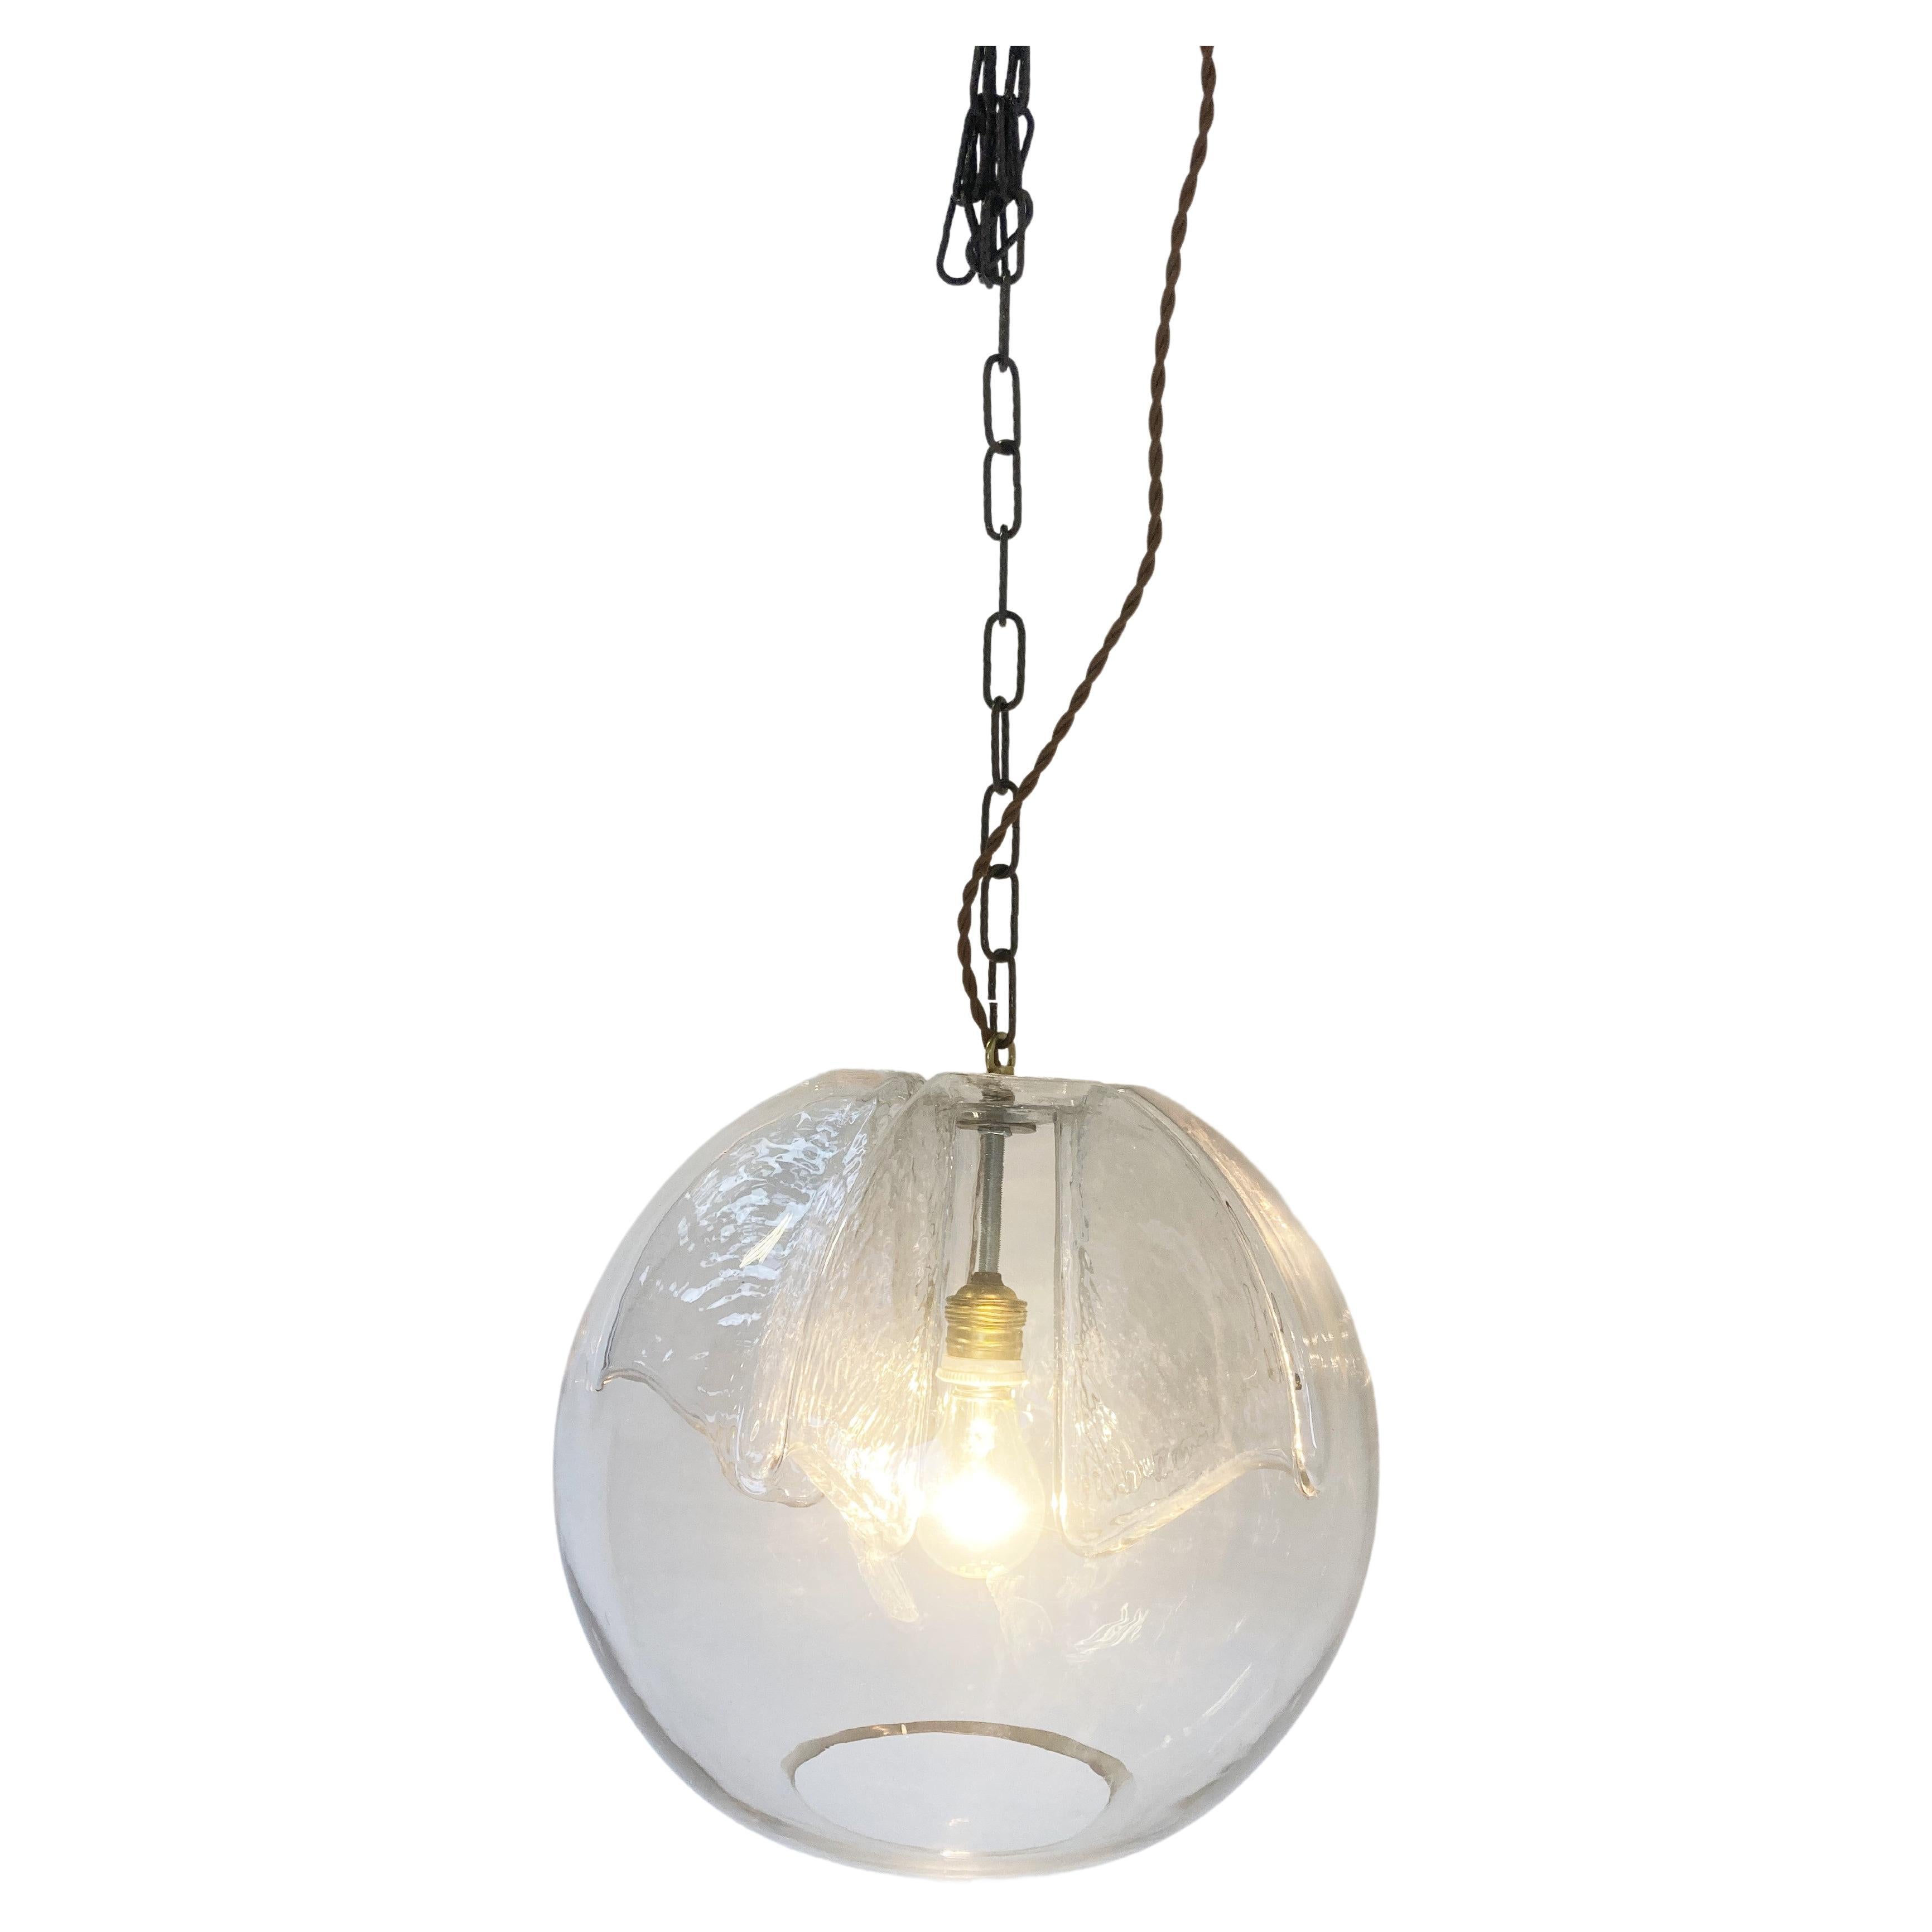 Glass pendant light by Peil and Putzler, 1970s